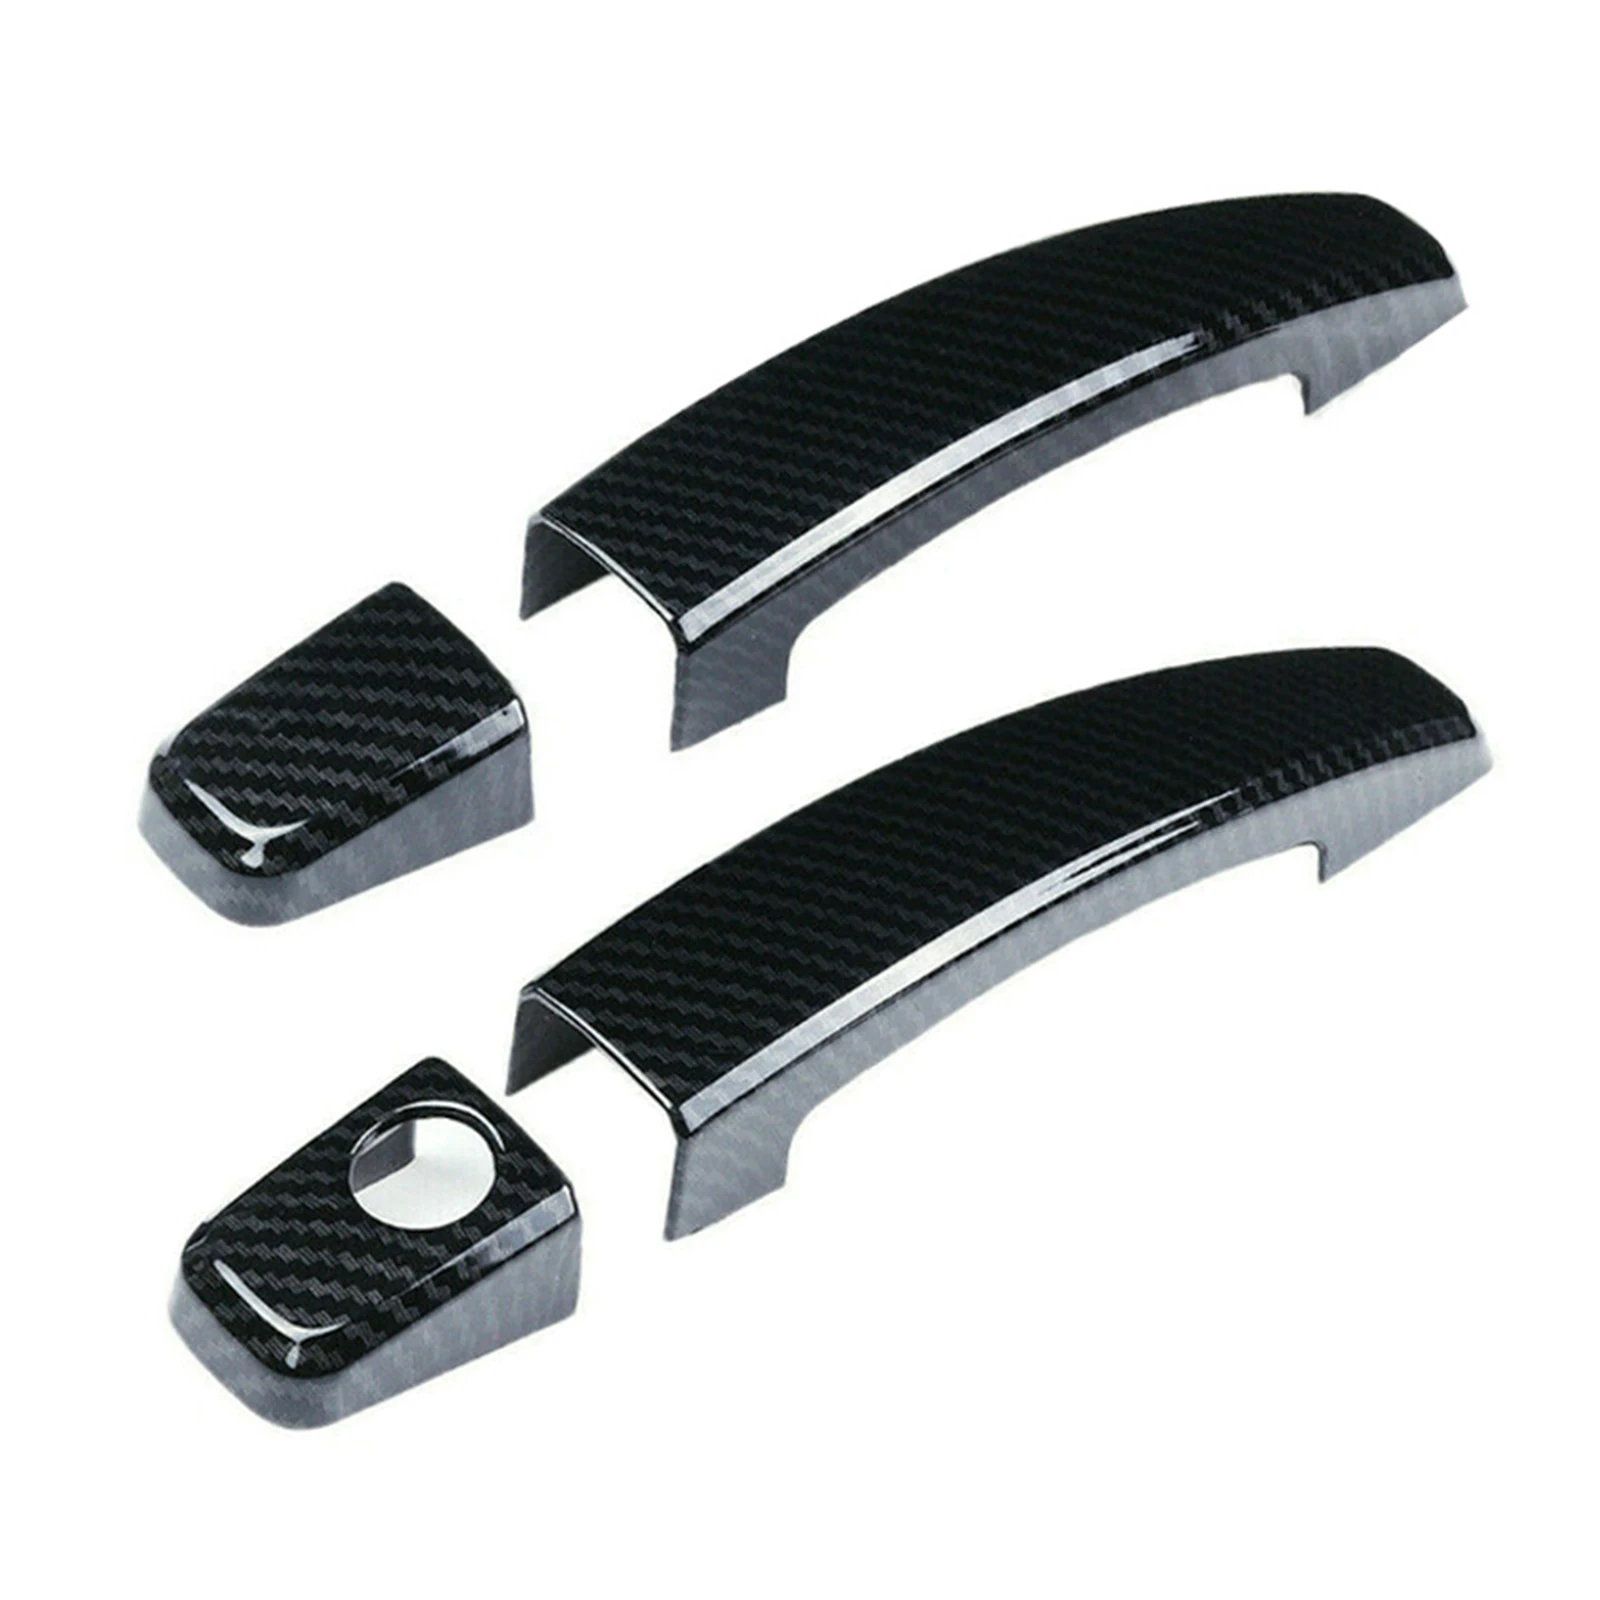 Glossy Carbon Fiber Style Door Handle Covers Outer Trim For Chevrolet Camaro 2010-2015 Driver + Passenger Side Left + Right